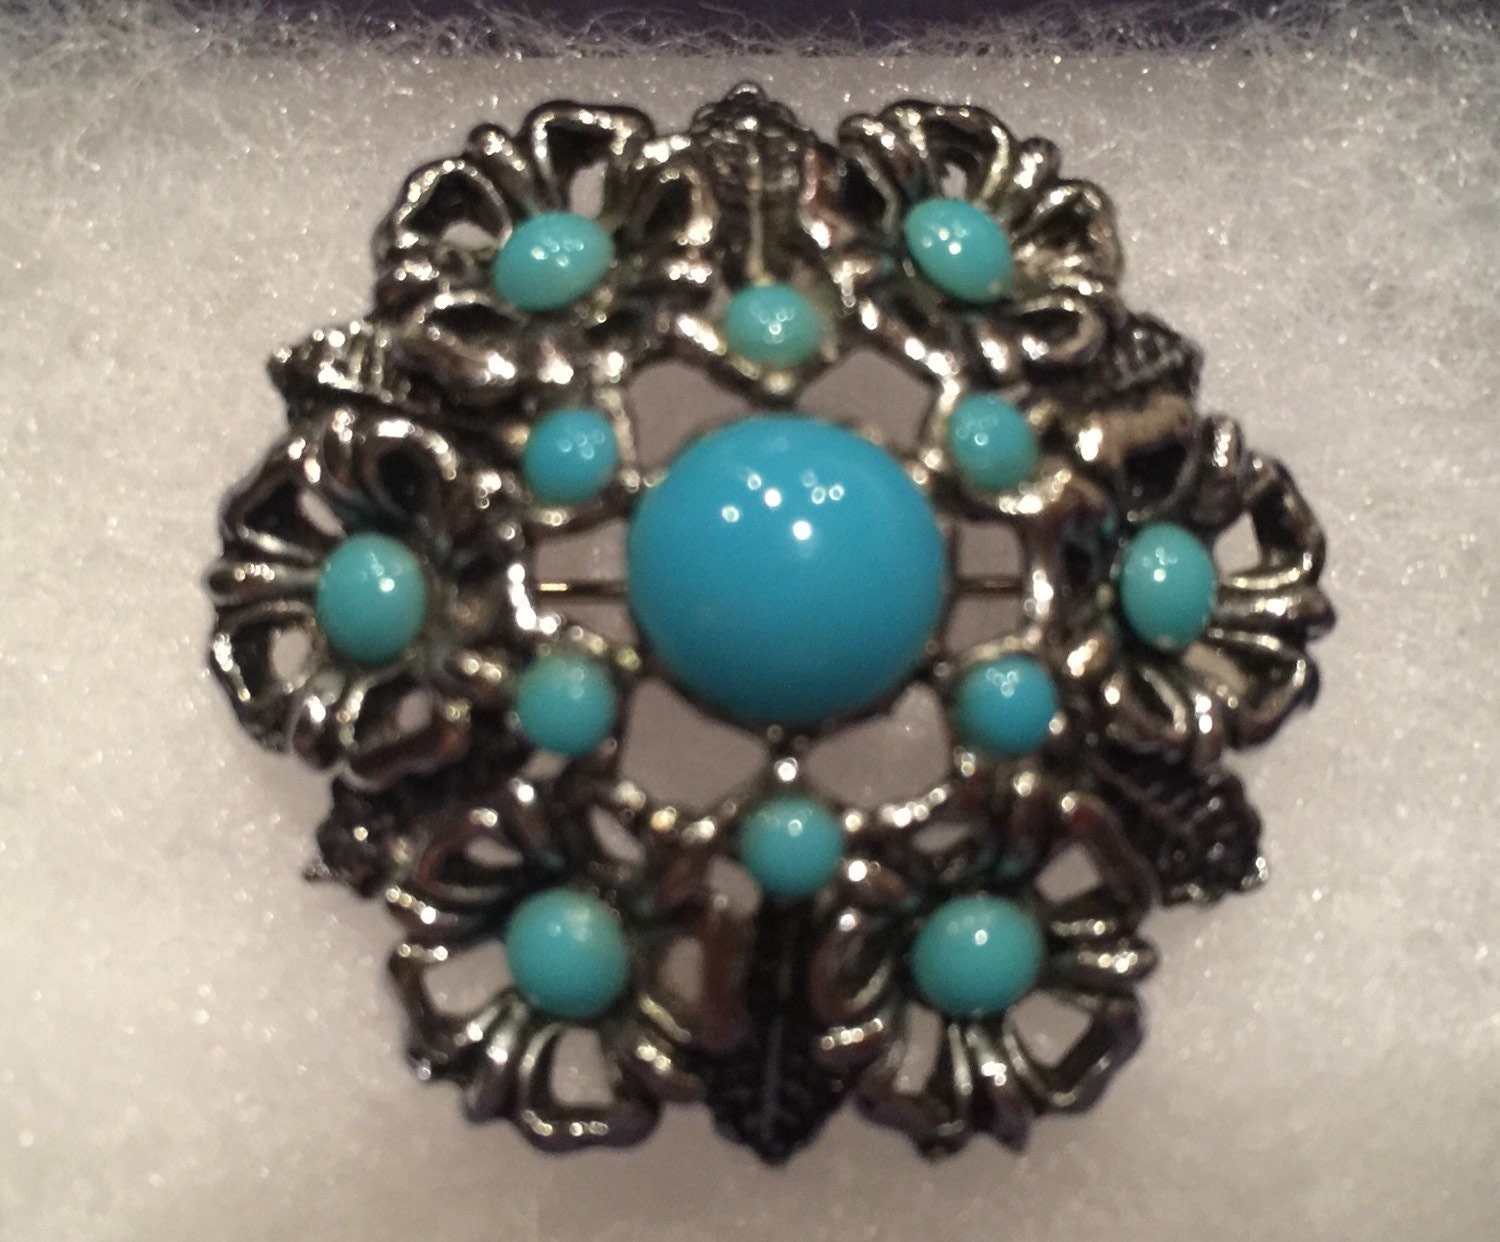 c1930's White Metal and Turquoise Stone Brooch